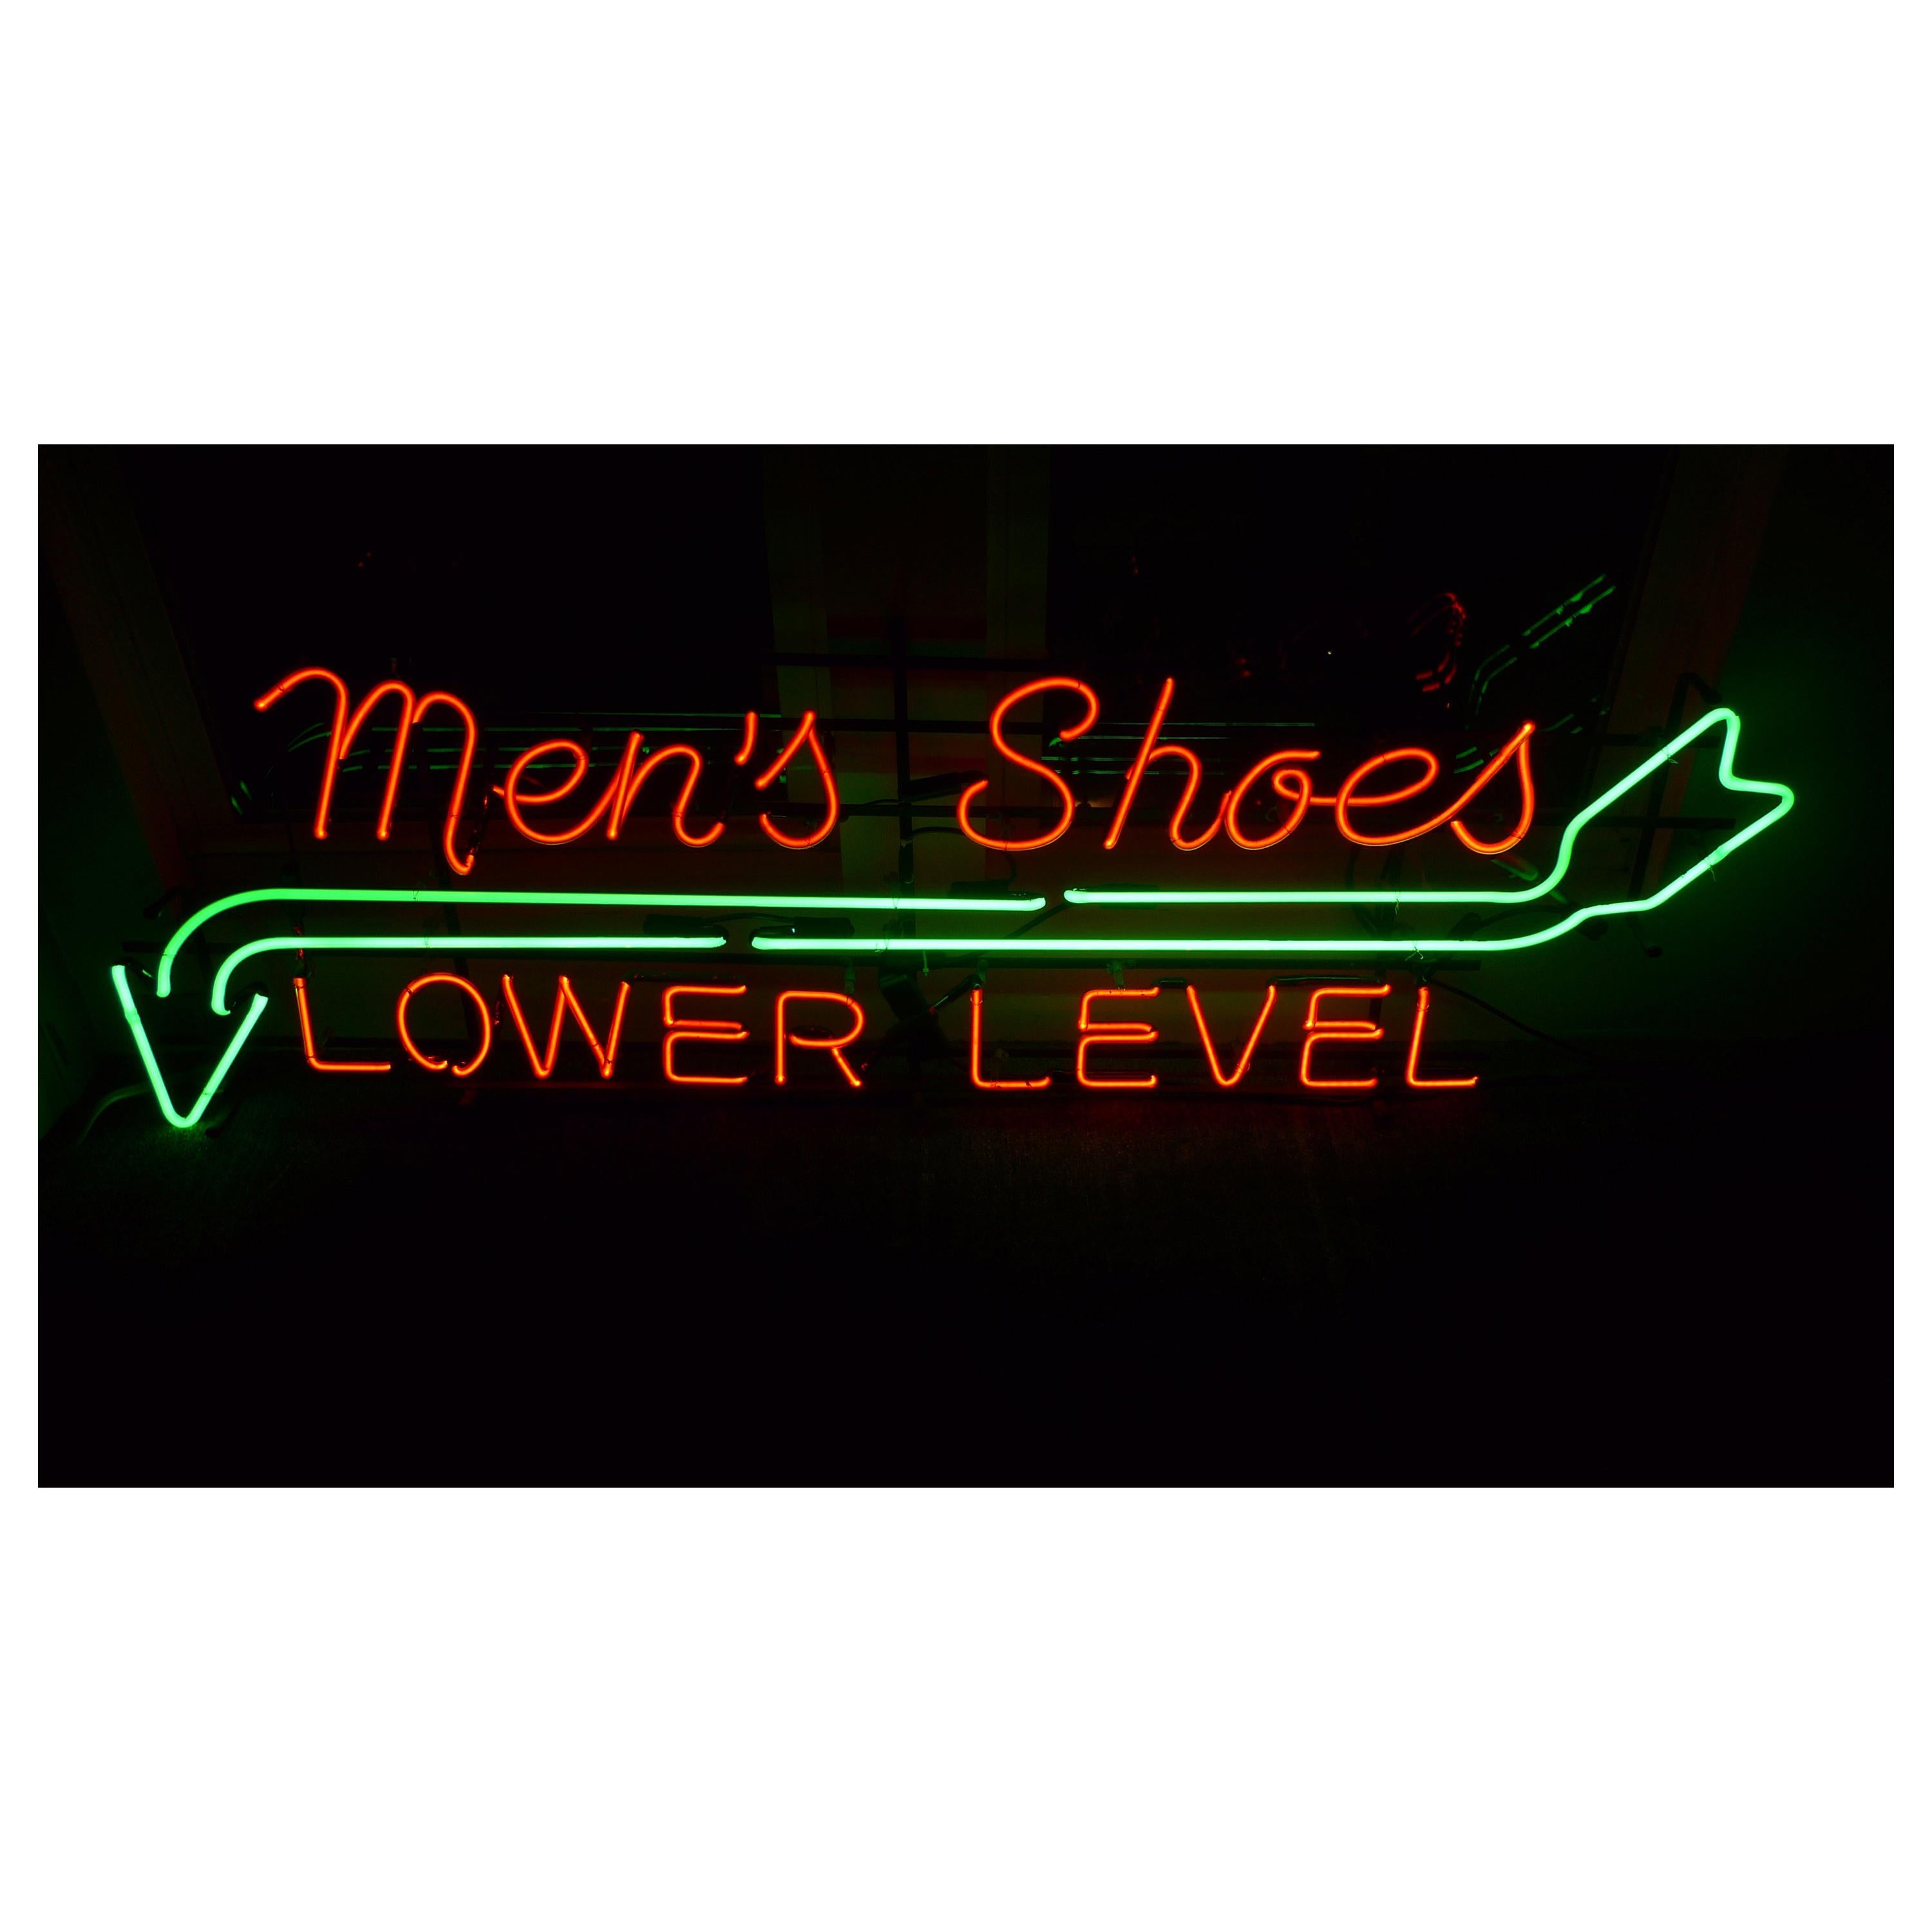 Neon Sign from Department Store, Men's Shoes, Lower Level, circa 1930s For Sale